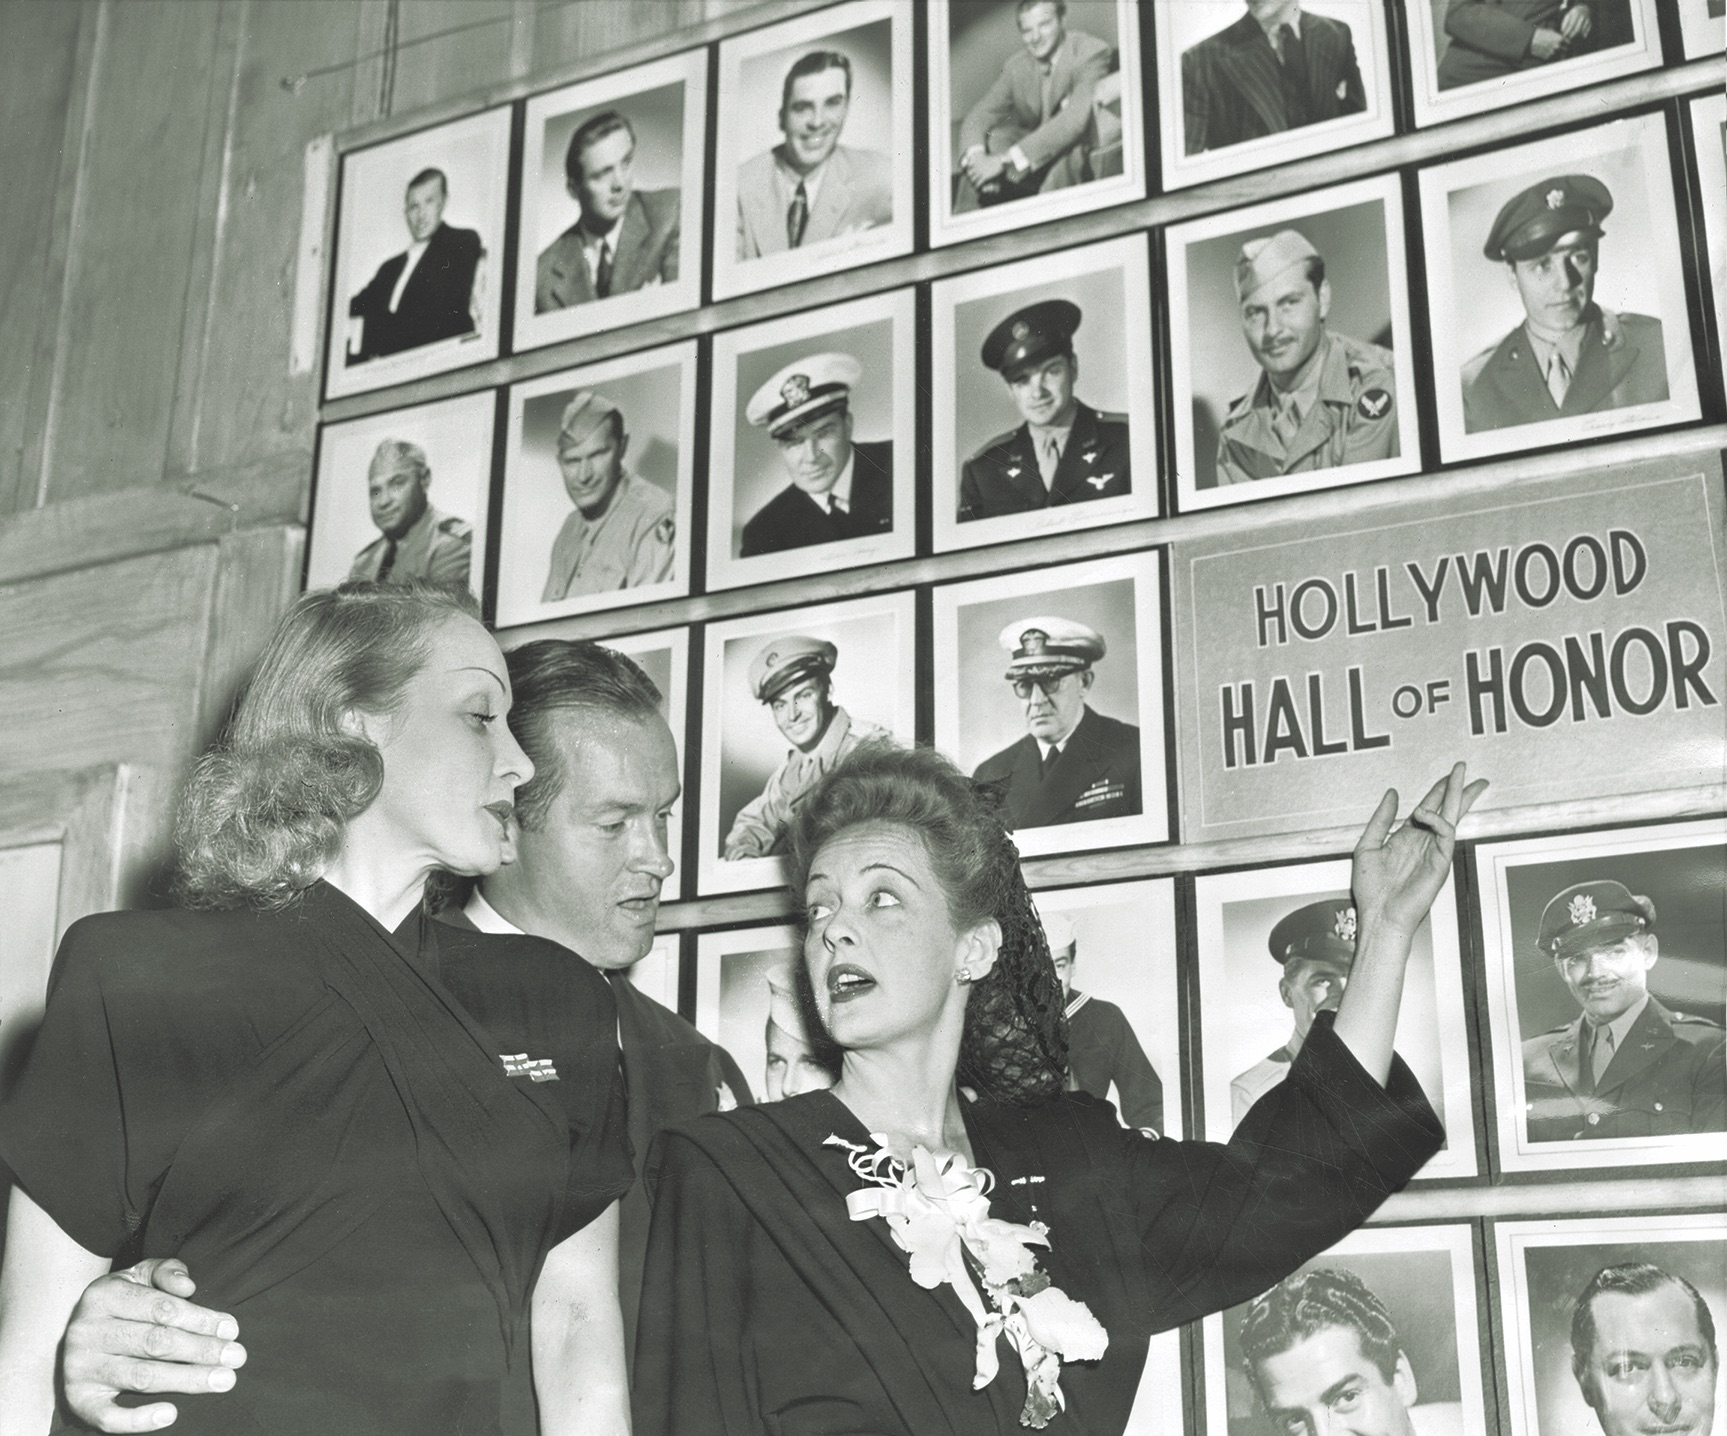 Bette Davis shows the Hollywood Canteen’s Hall of Honor to Marlene Dietrich and Bob Hope in 1943. (Herald Examiner Collection/Los Angeles Public Library)